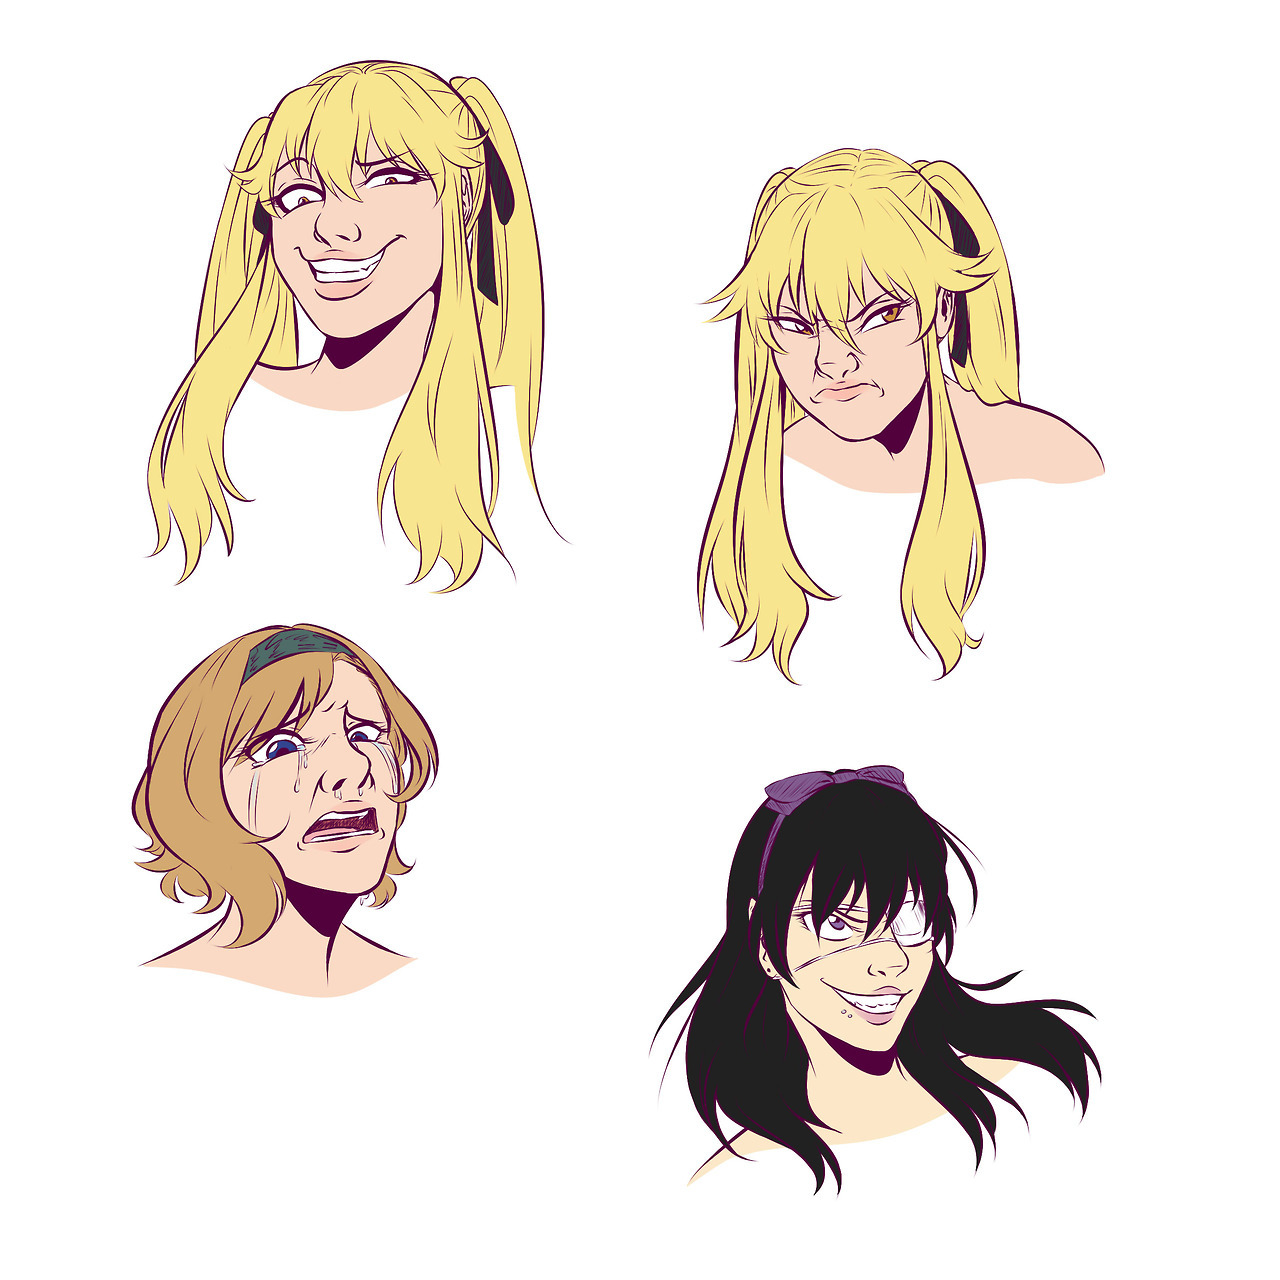 cute-anonyme-art:Tried some expression practice with some Kakegurui girls. Idk how